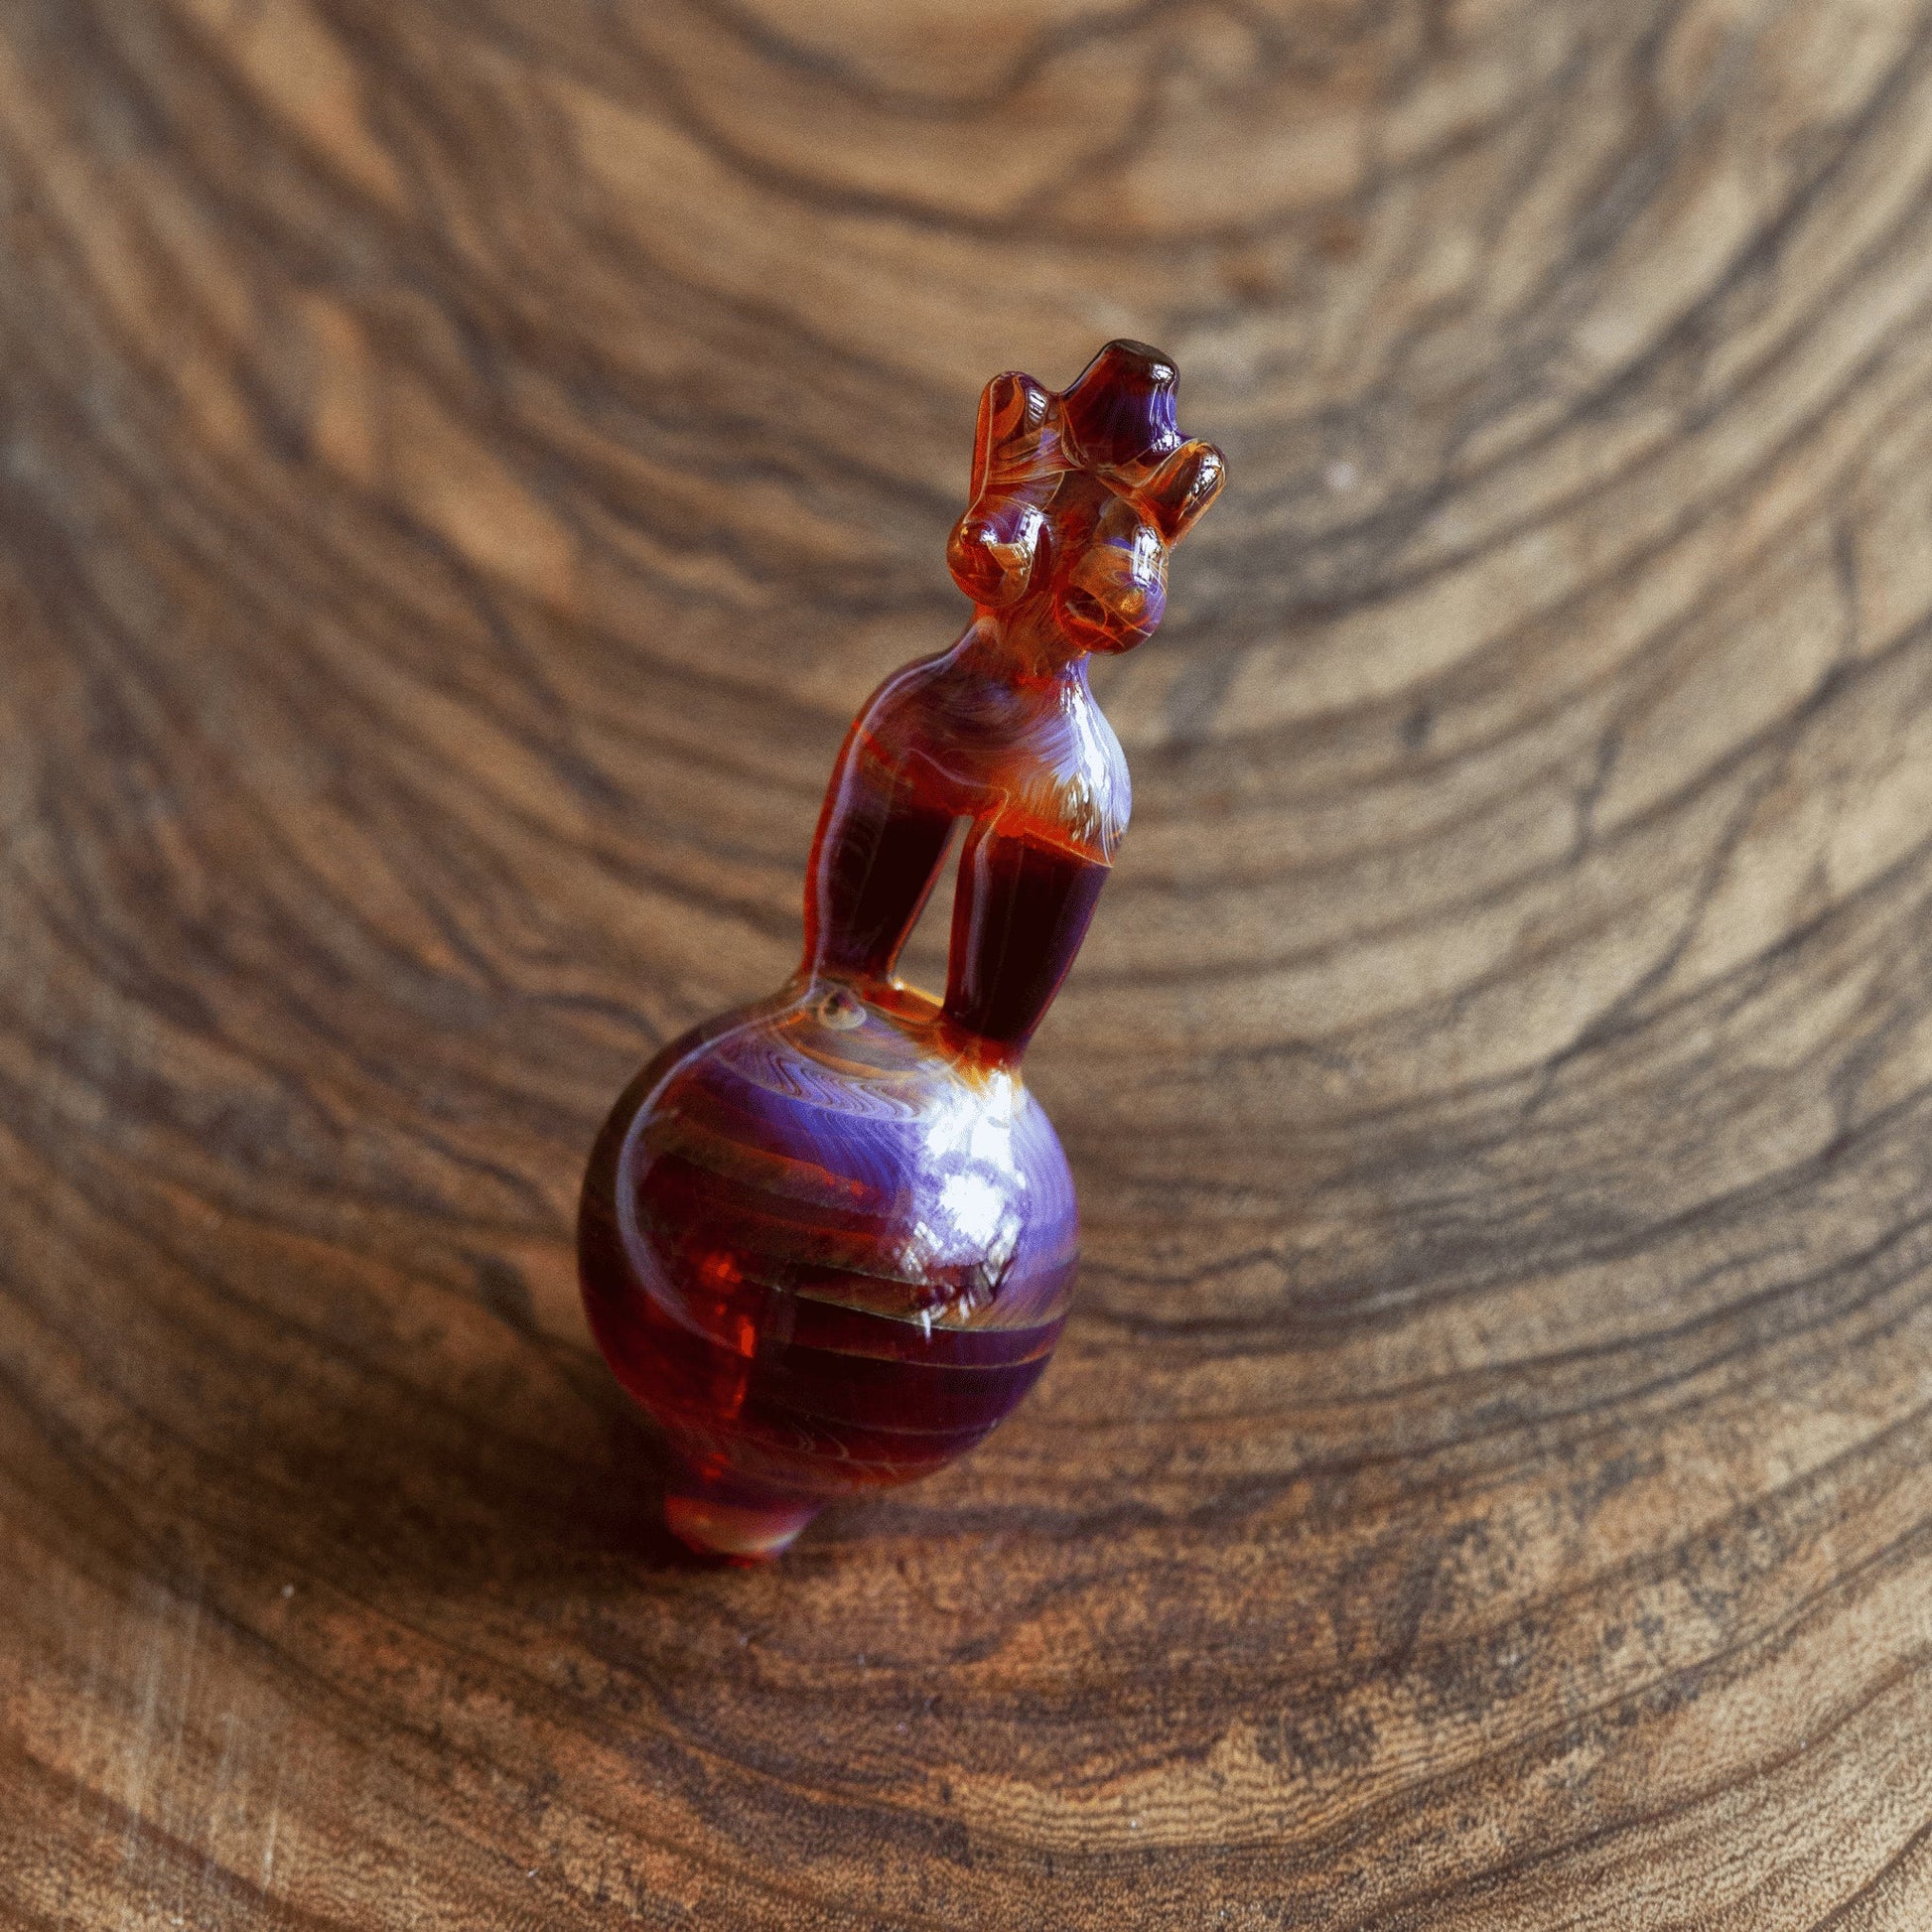 exclusive design of the Amber Purple Dabber Tool & Carb Cap Set by KT Scissorbaby